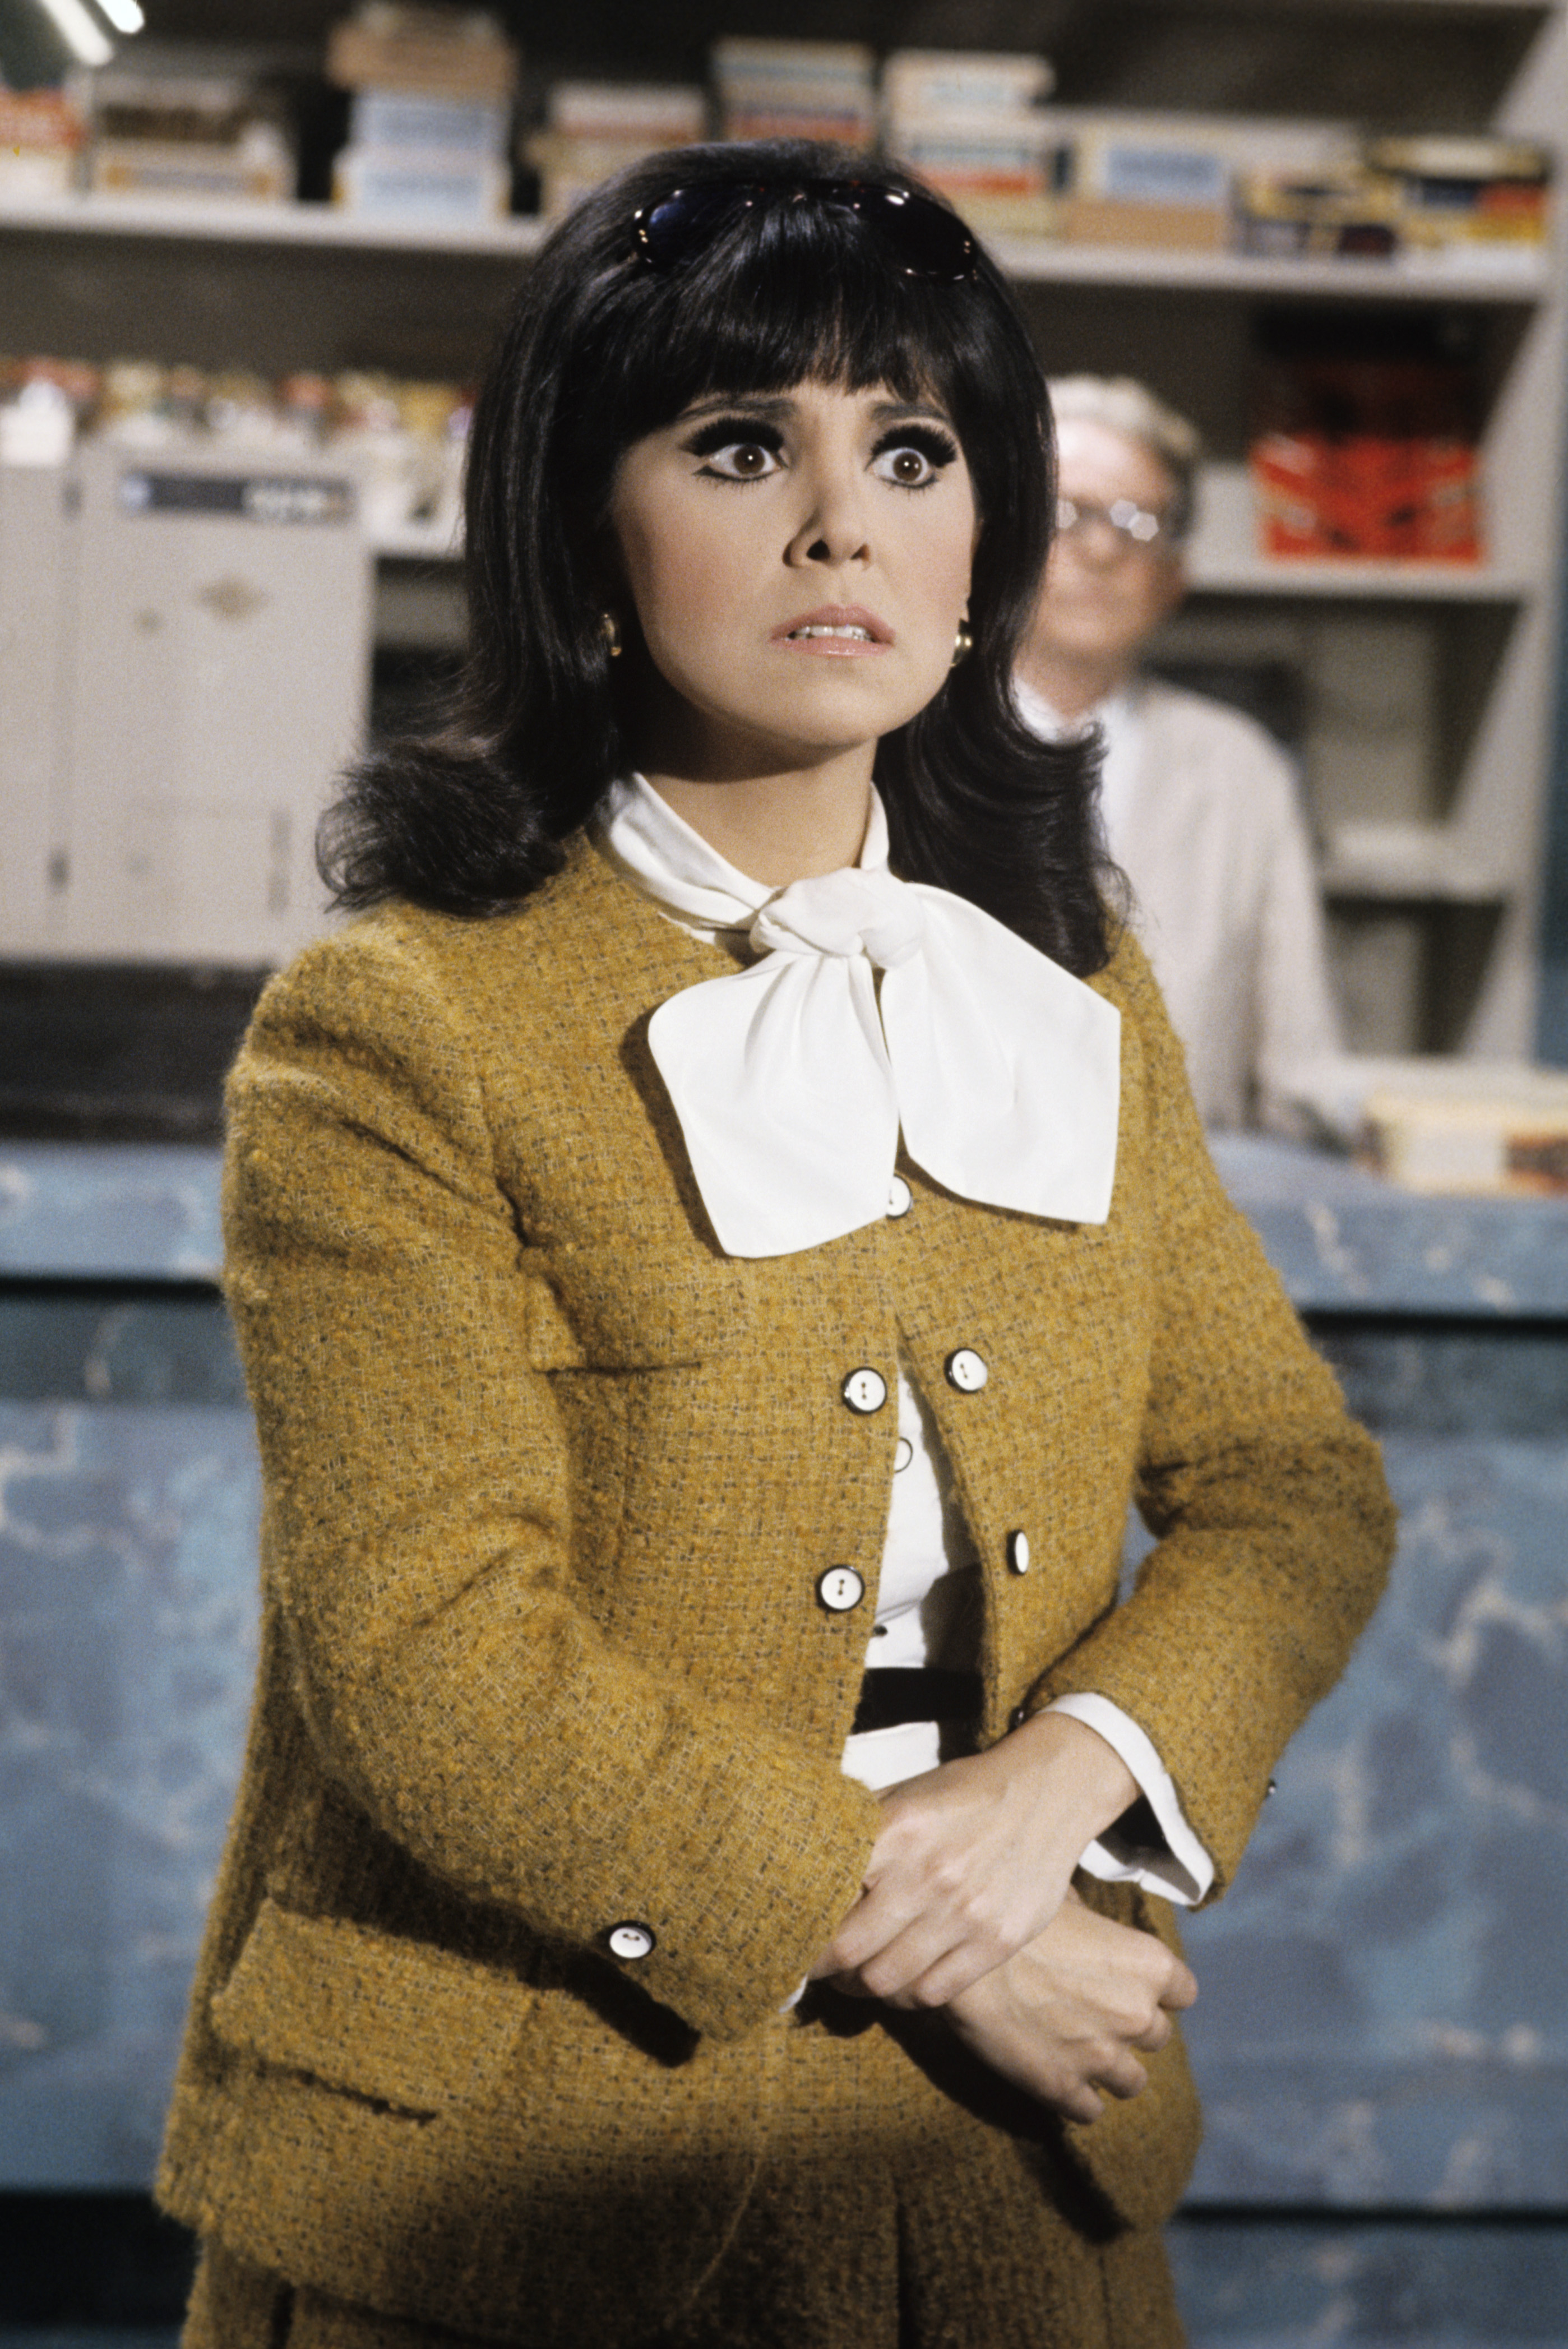 Marlo Thomas in "That Girl" in 1970 | Source: Getty Images